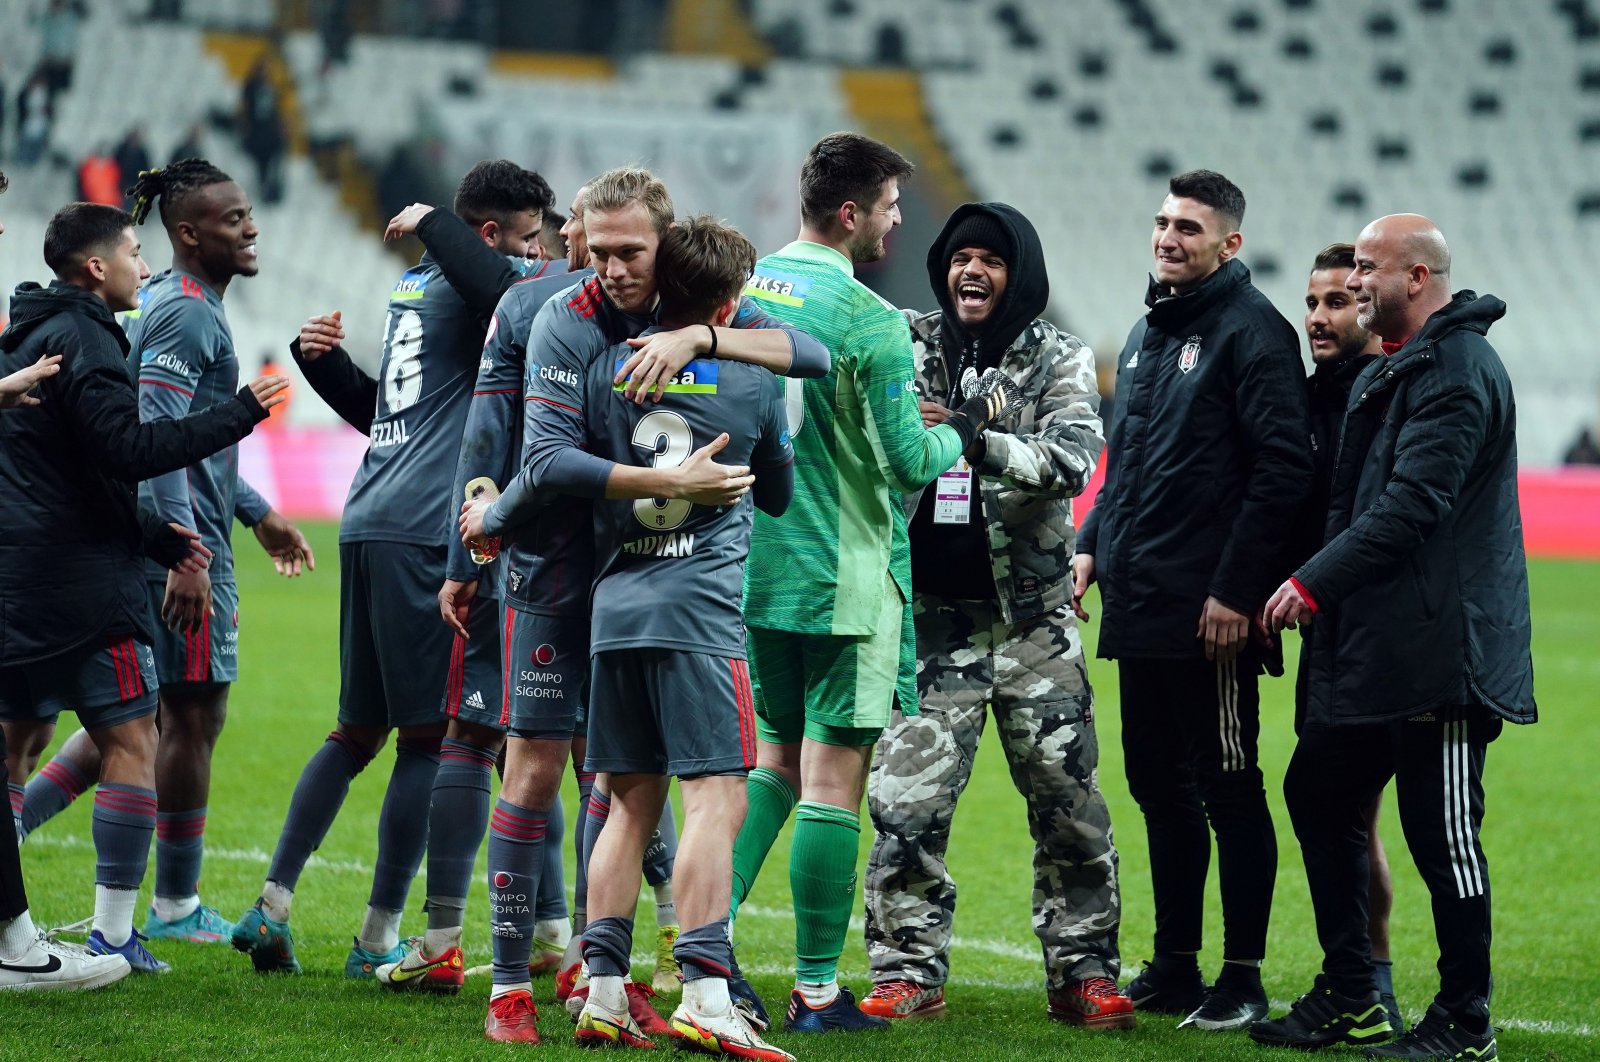 Beşiktaş players celebrate the victory during the Turkish Cup Round of 16 match at the Vodafone Park in Istanbul on Feb. 11, 2022 (AA Photo)